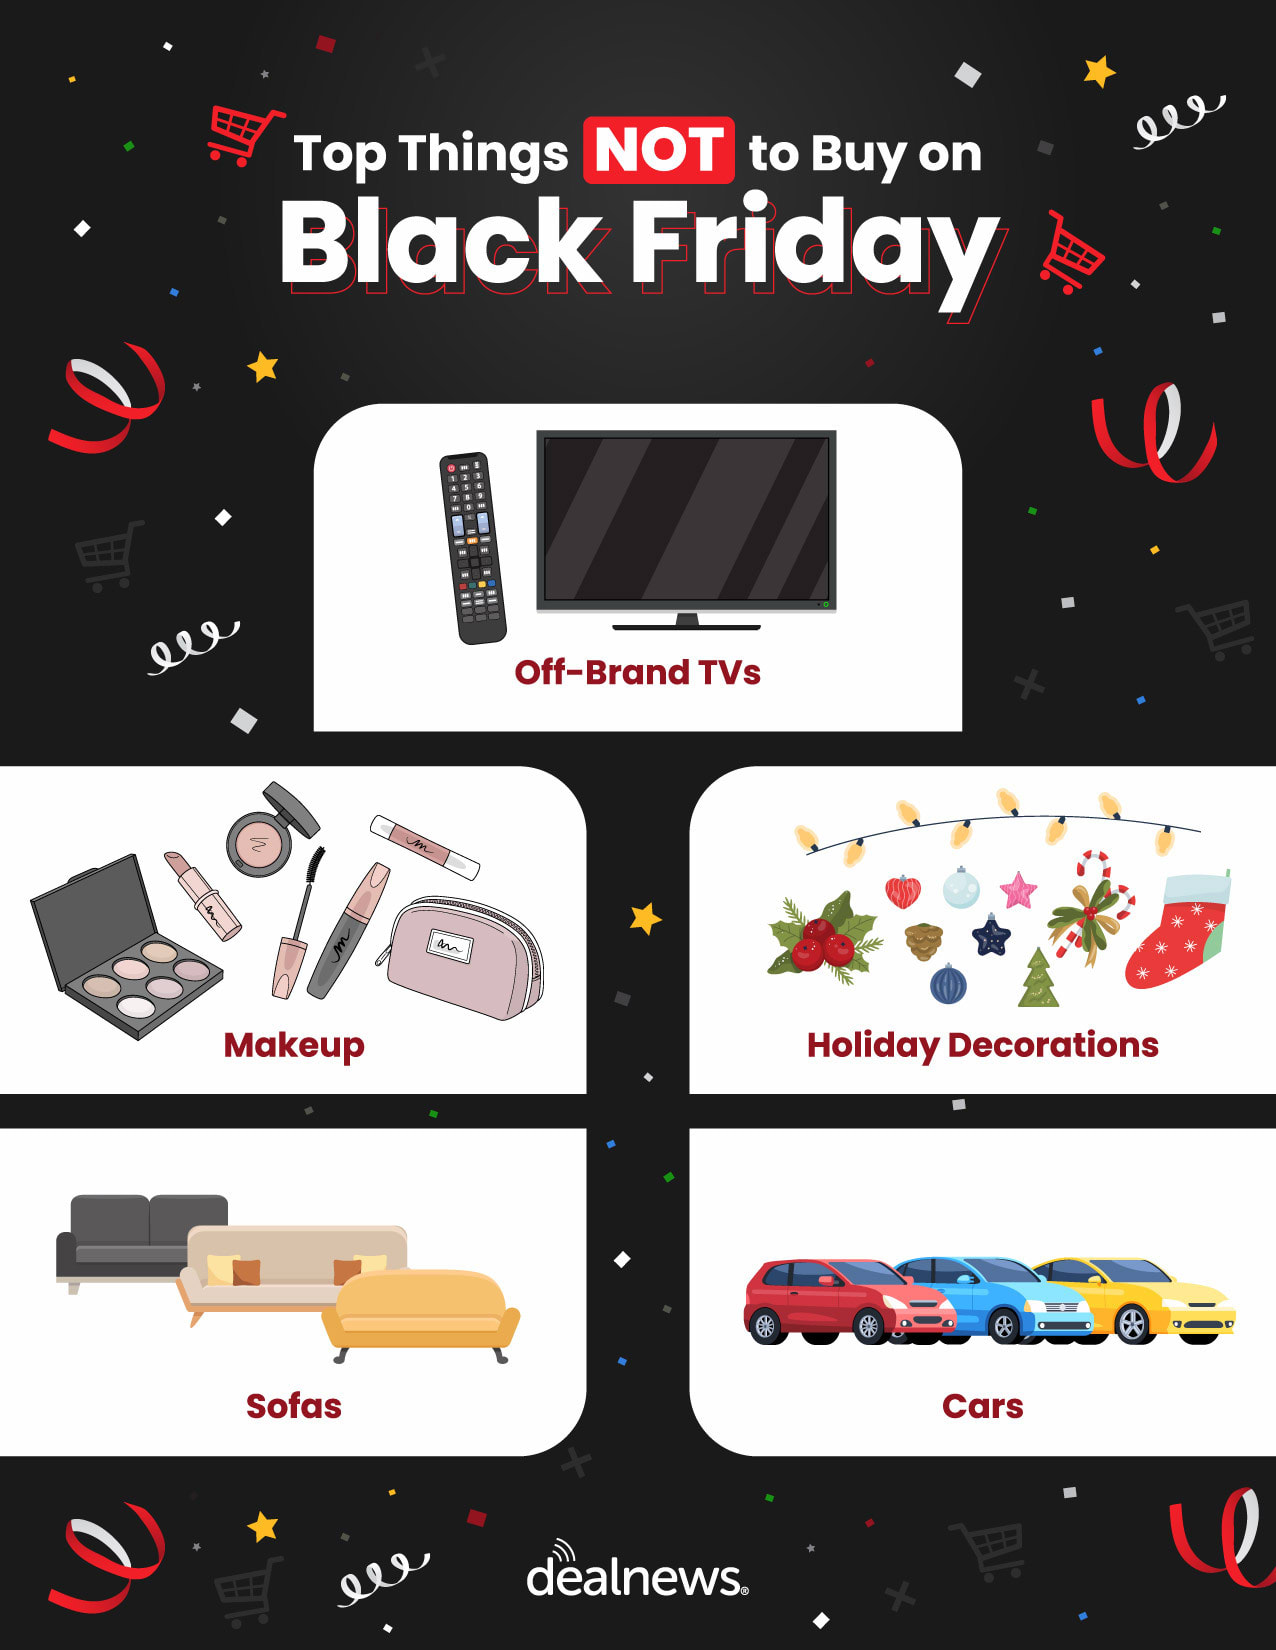 Top things not to buy on Black Friday.